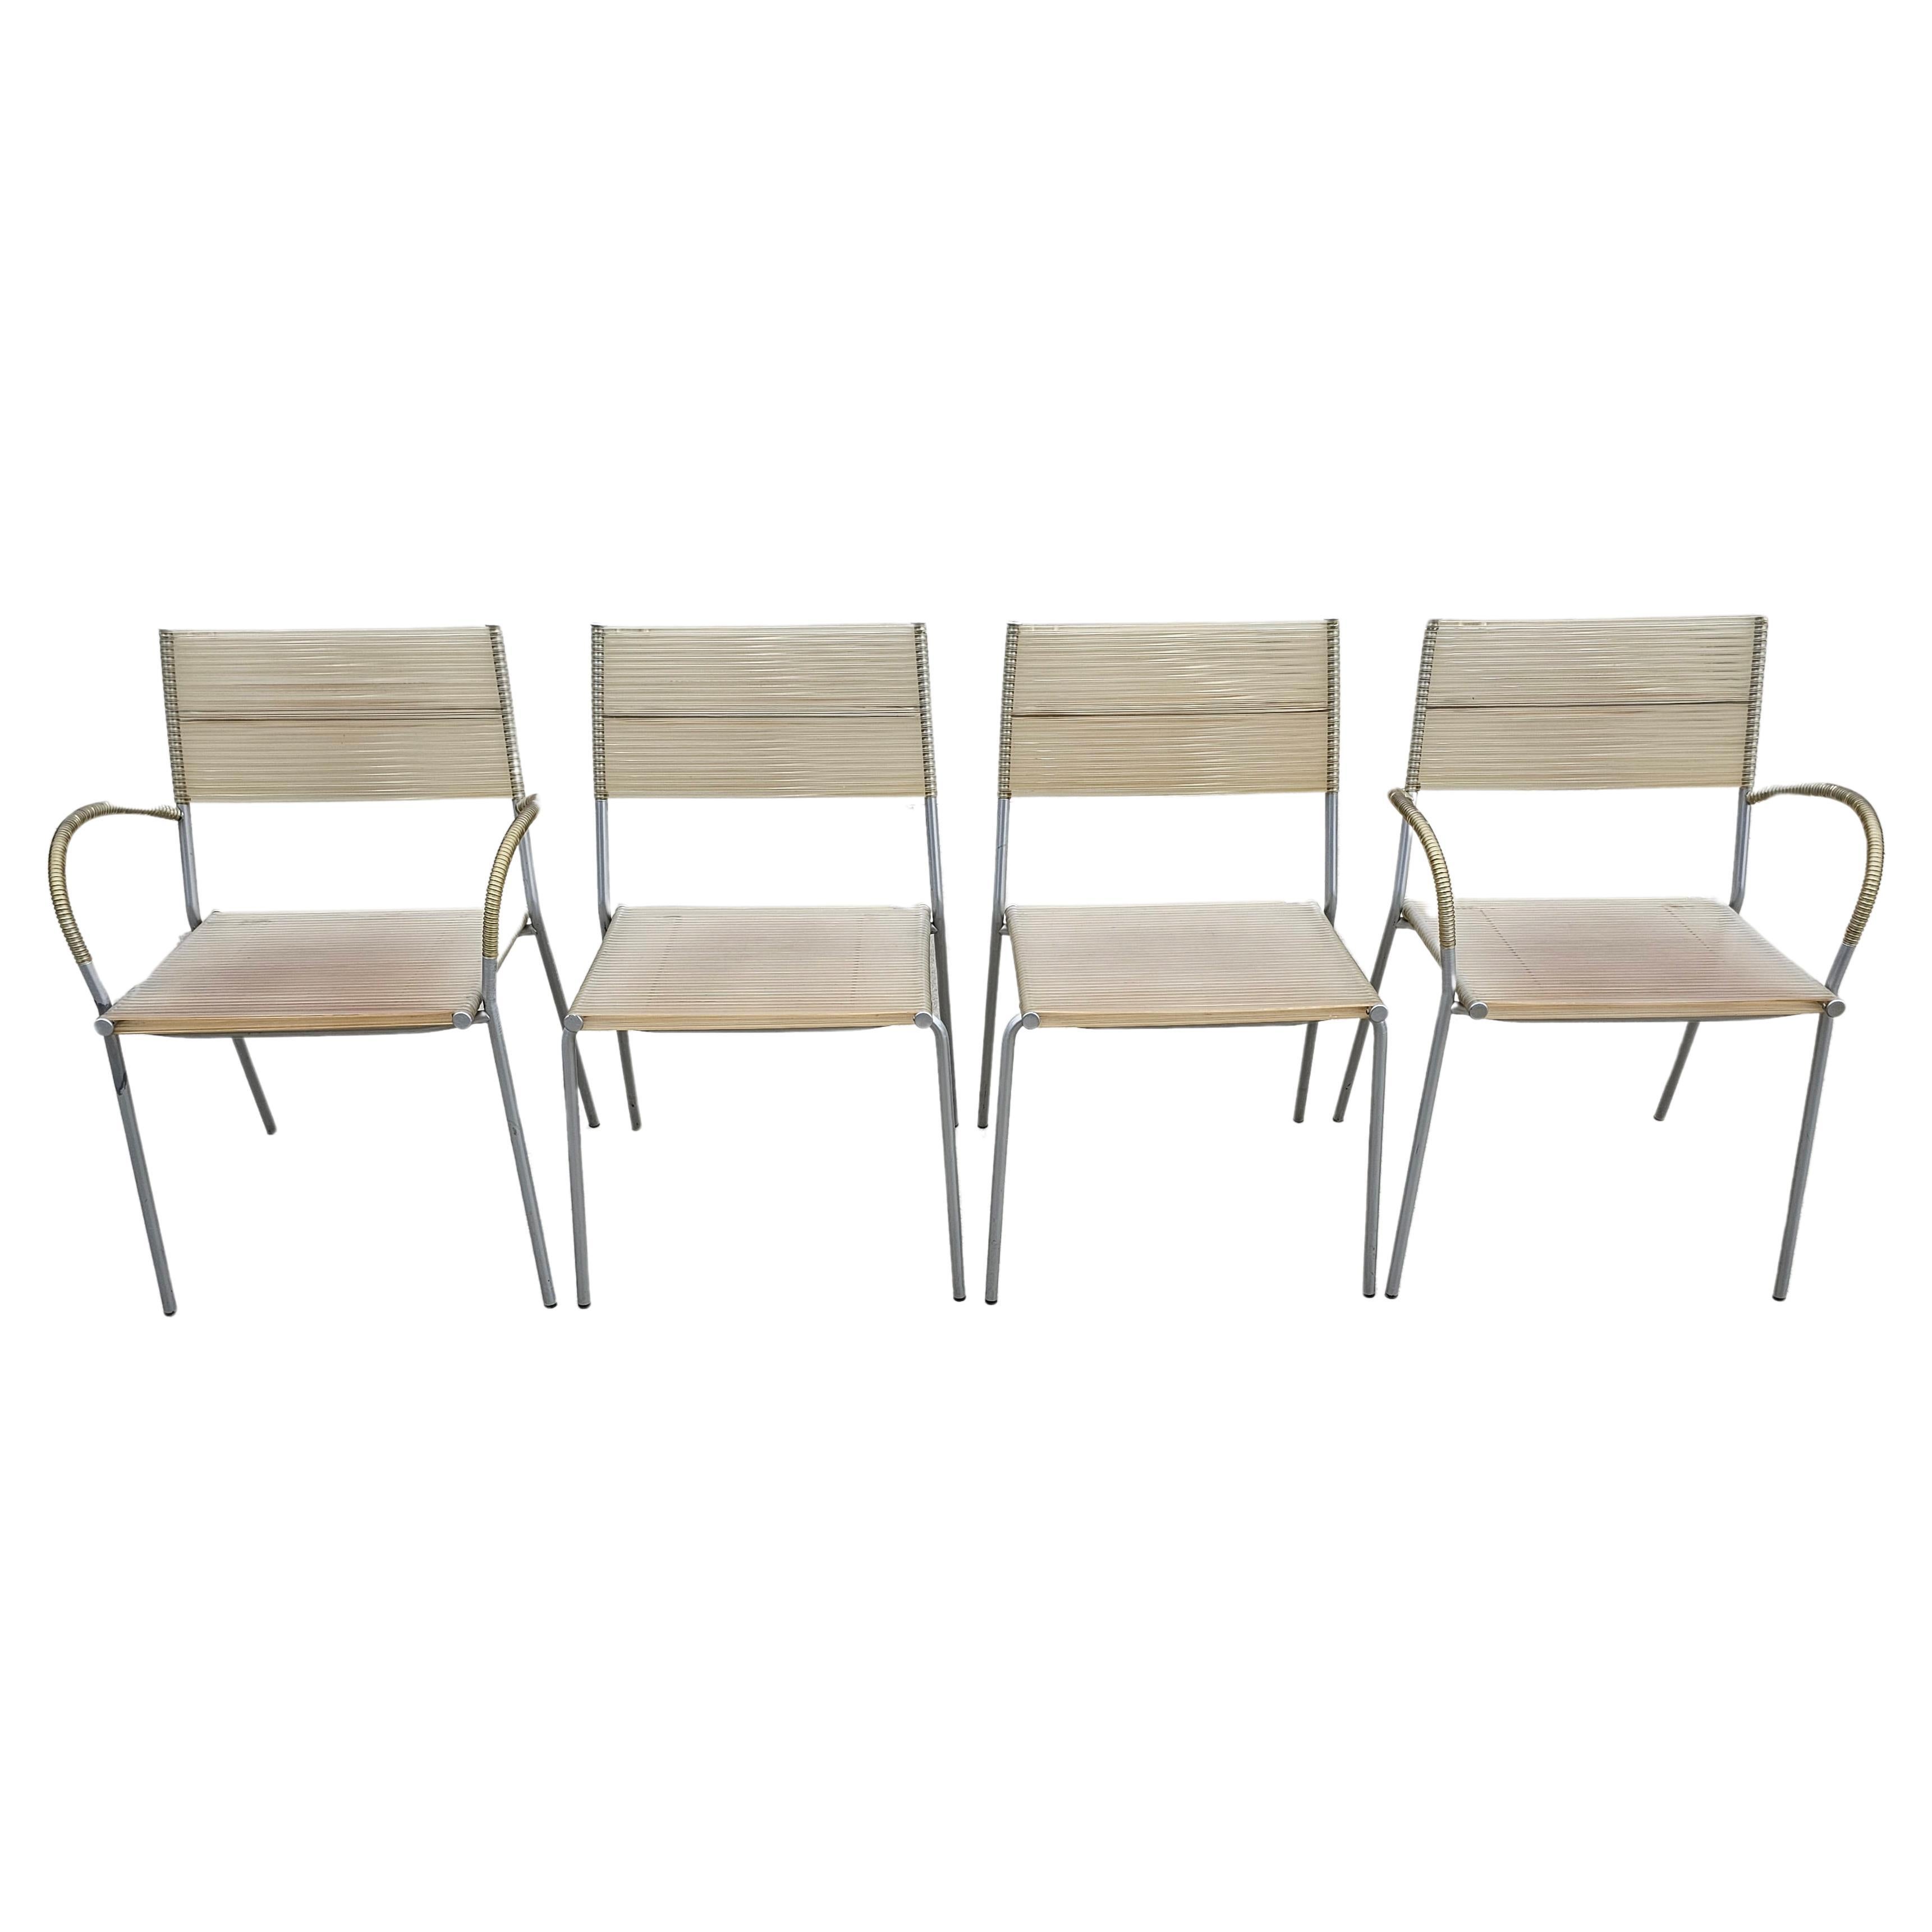 Set of 4 Dining Chairs "Miss B" by Tito Agnoli for Bonacina, Italy 1990s